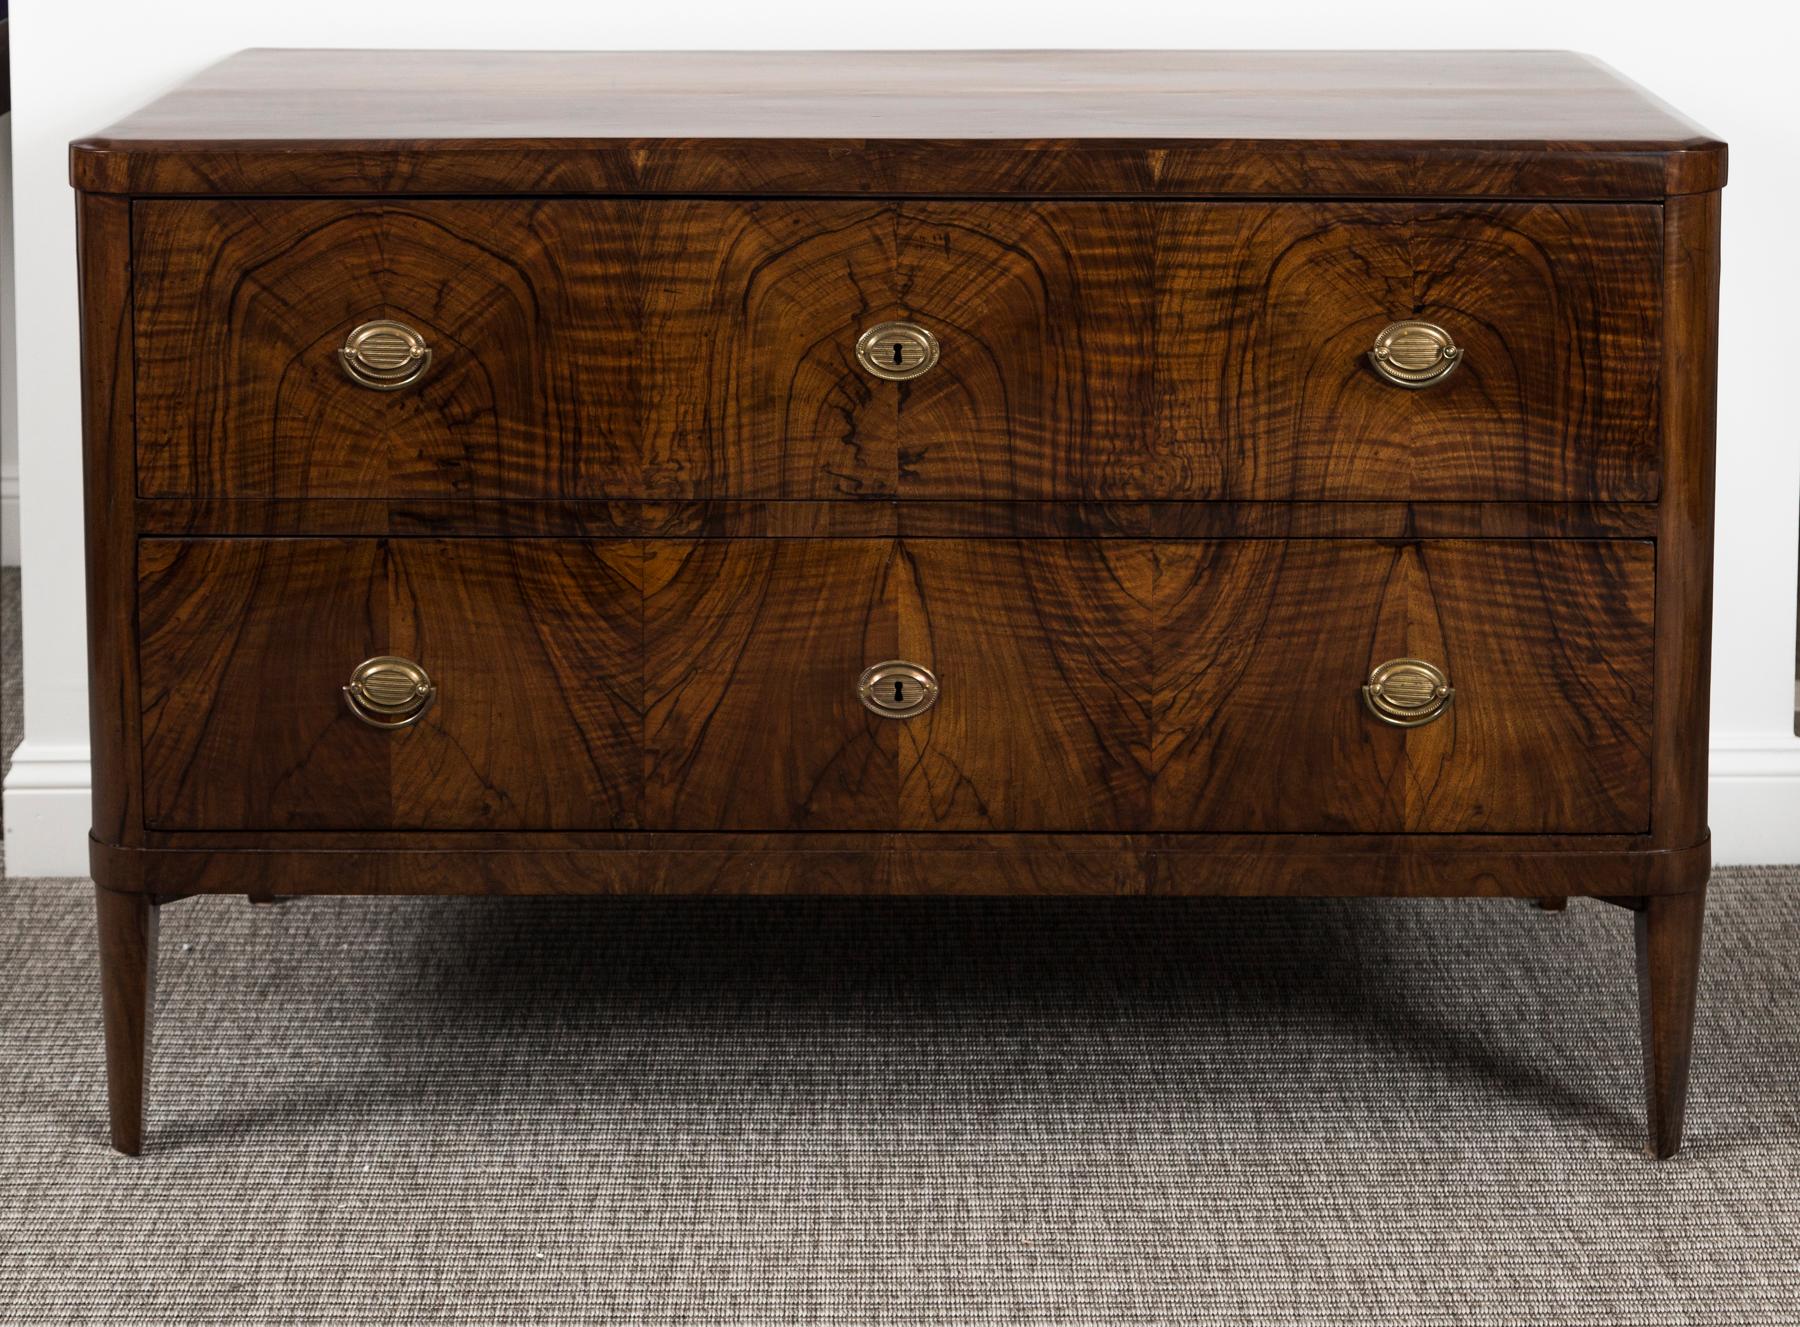 Extraordinary movement to this matchbook walnut veneer graces this finely composed two drawer chest shown with chamfered edges, finishing on tapered straight legs and embellished with original and finely chased bronze pulls.

Origin: Nussbaum,